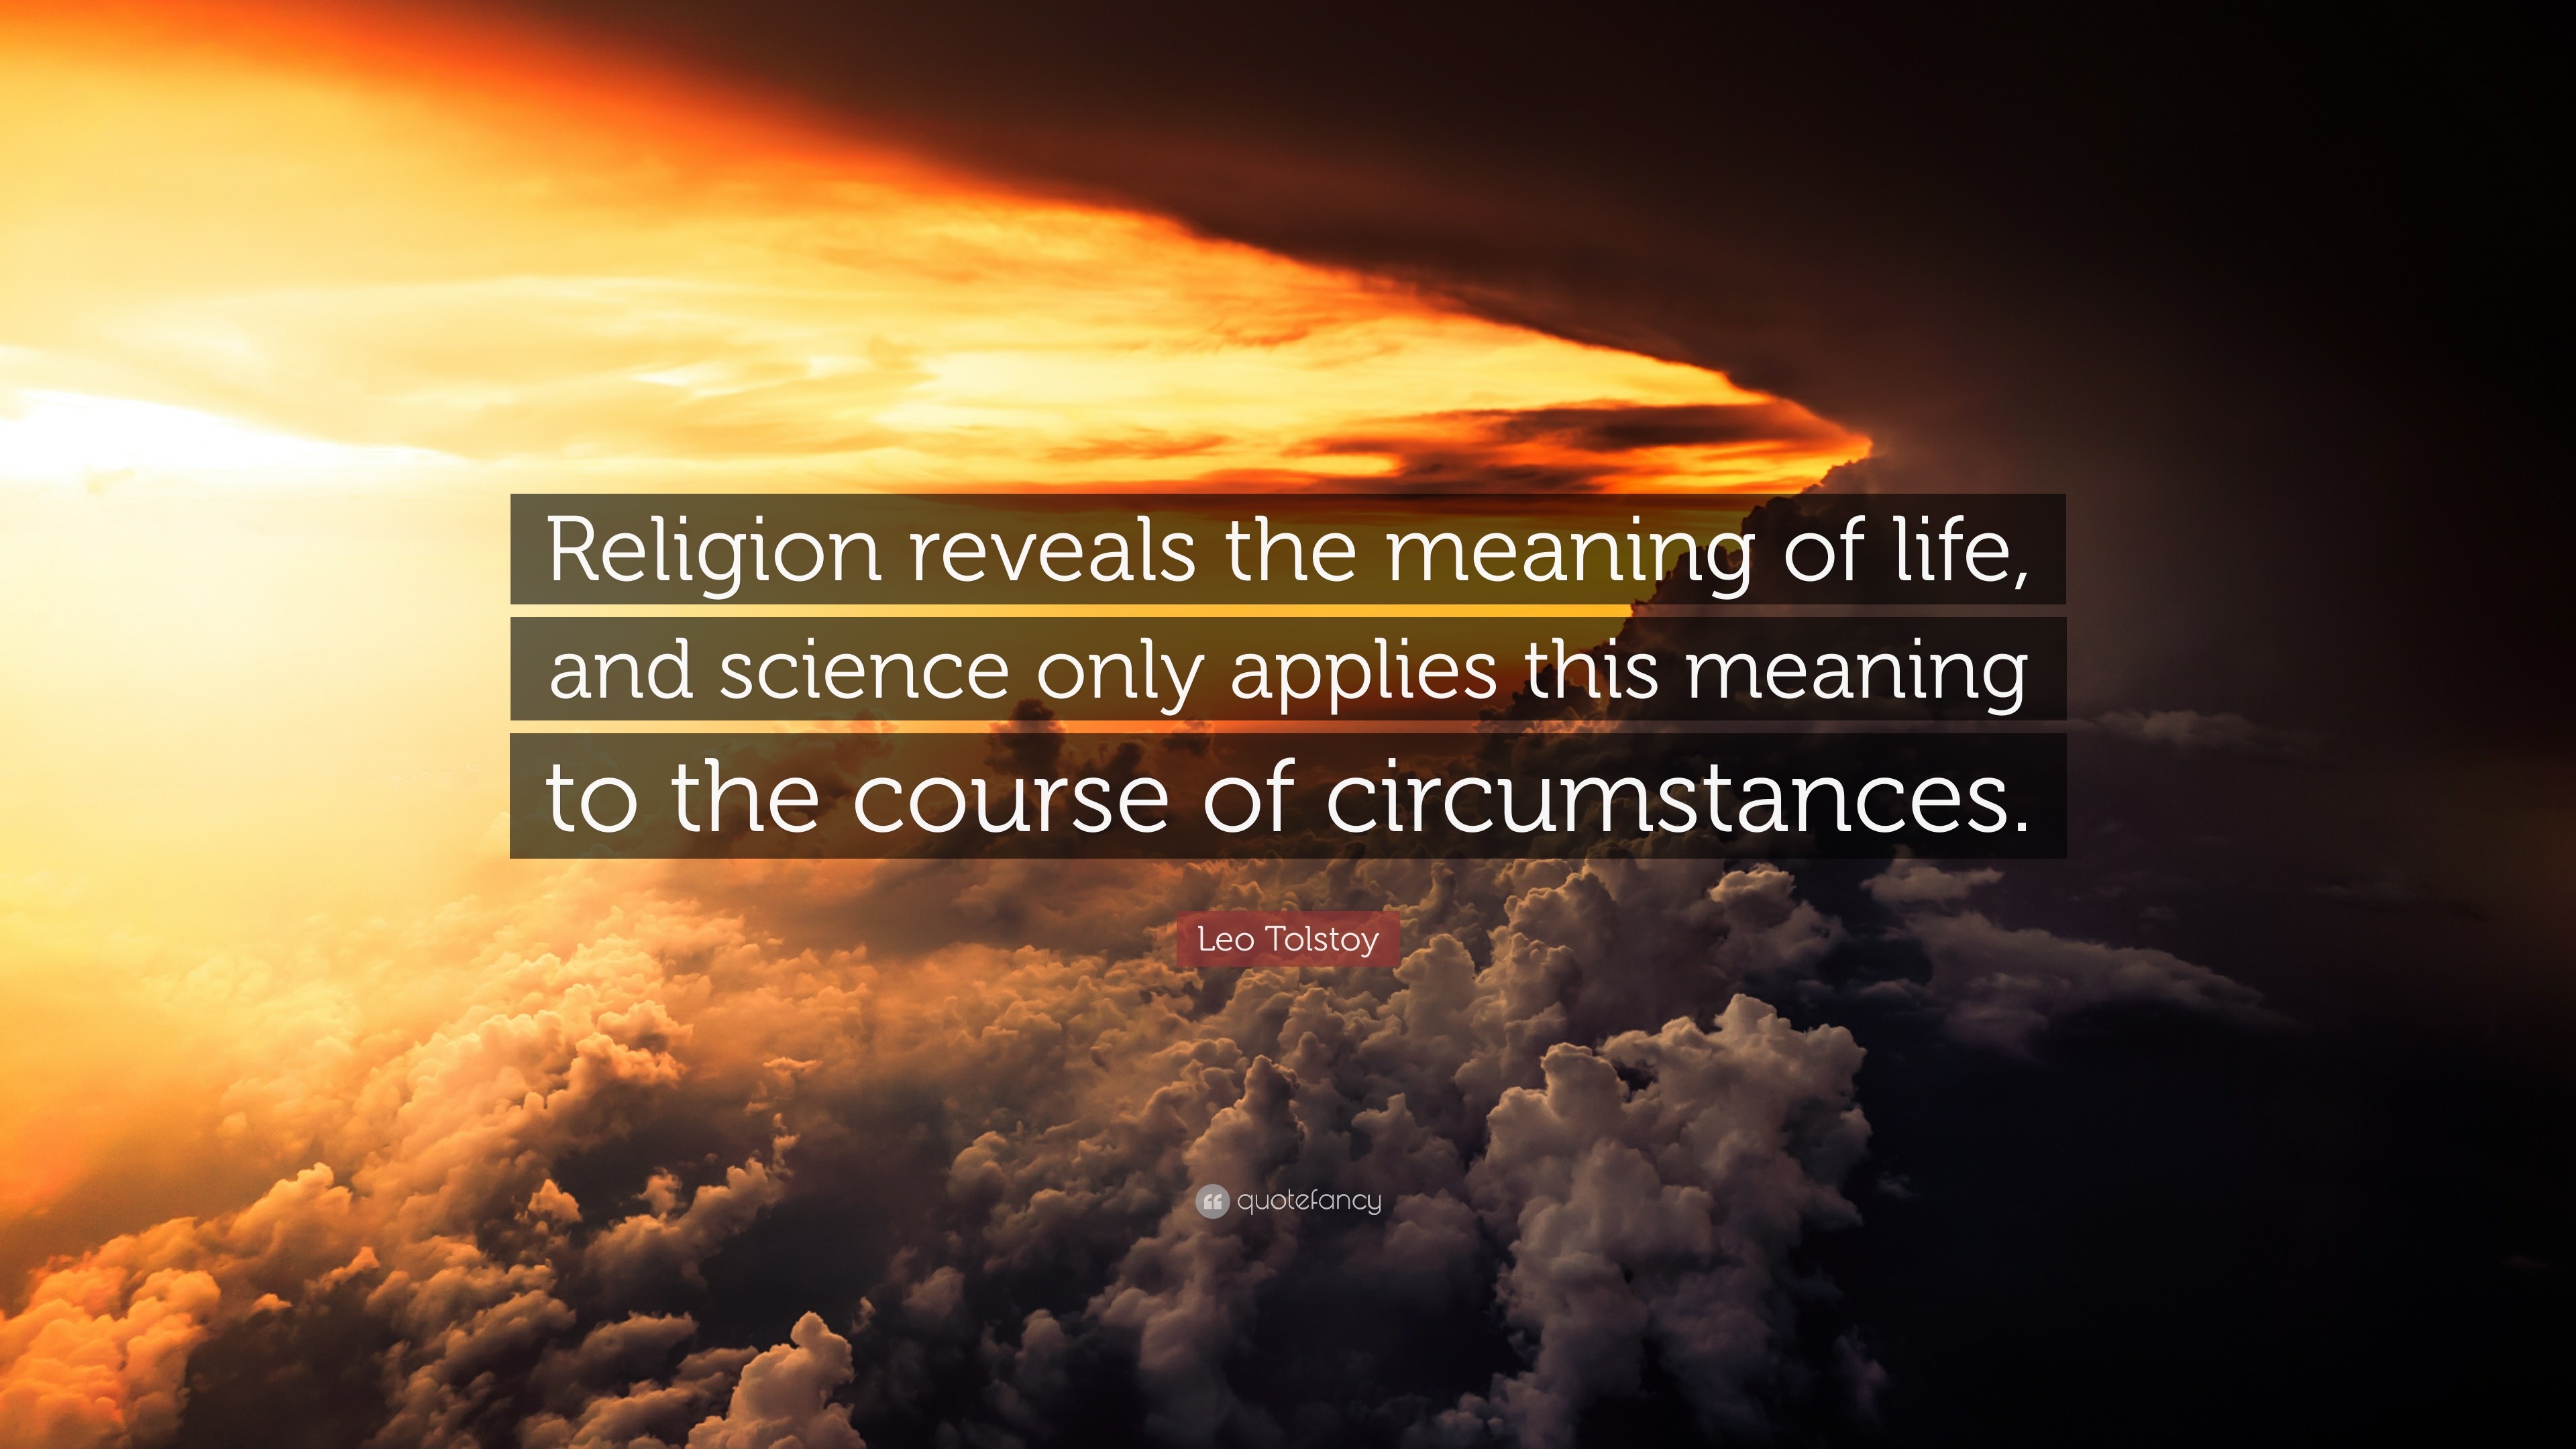 1796847 Leo Tolstoy Quote Religion reveals the meaning of life and science